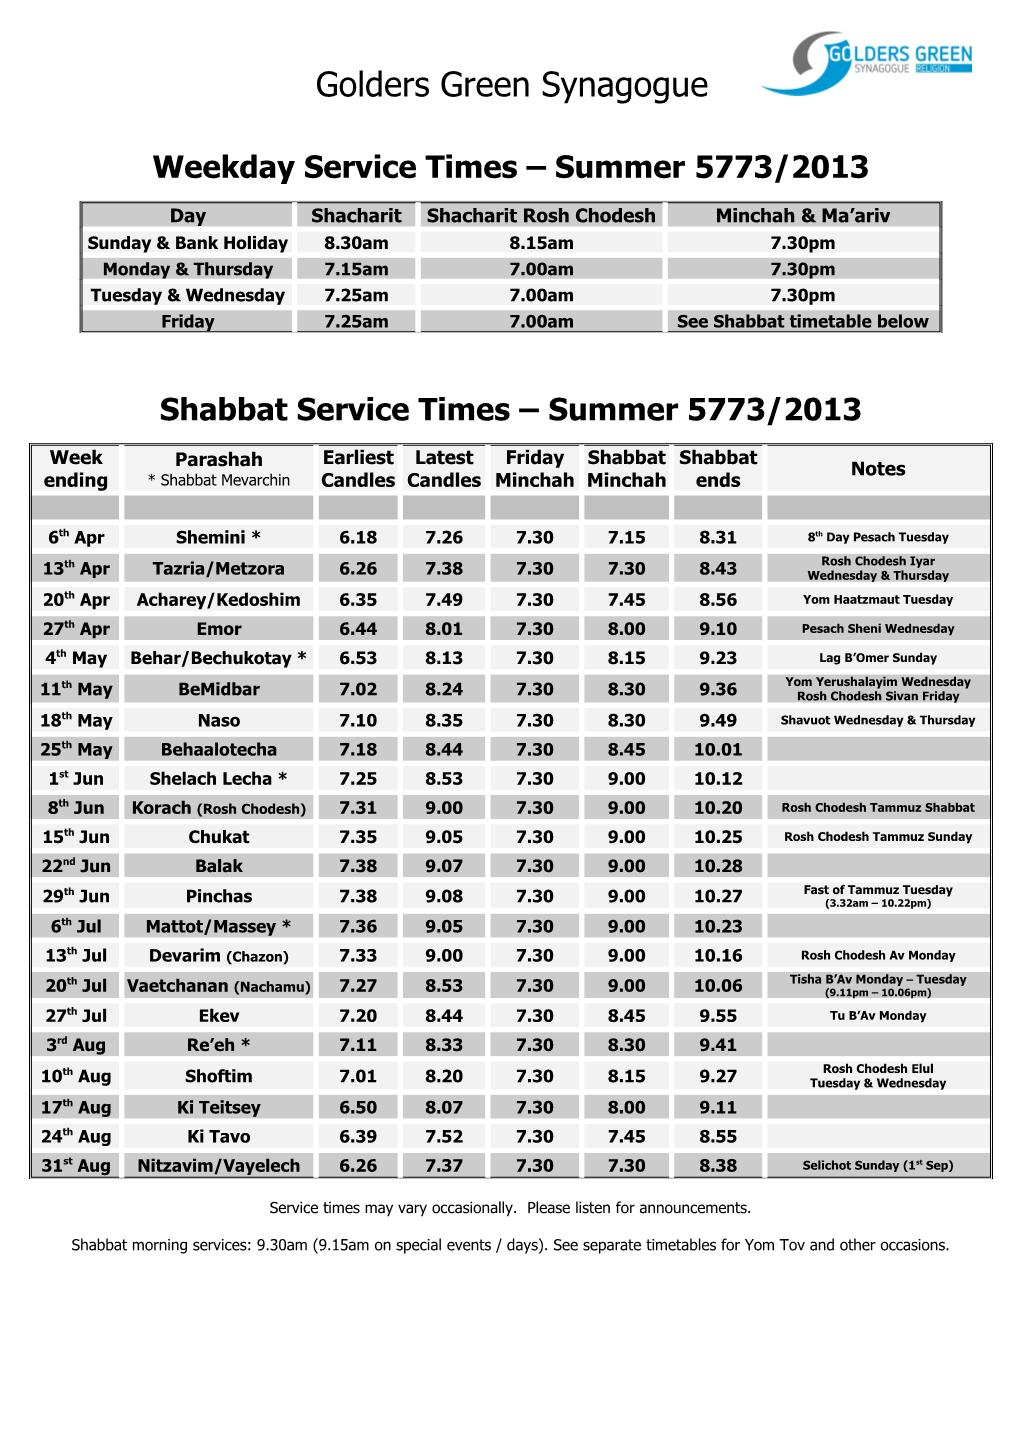 Weekday Service Times